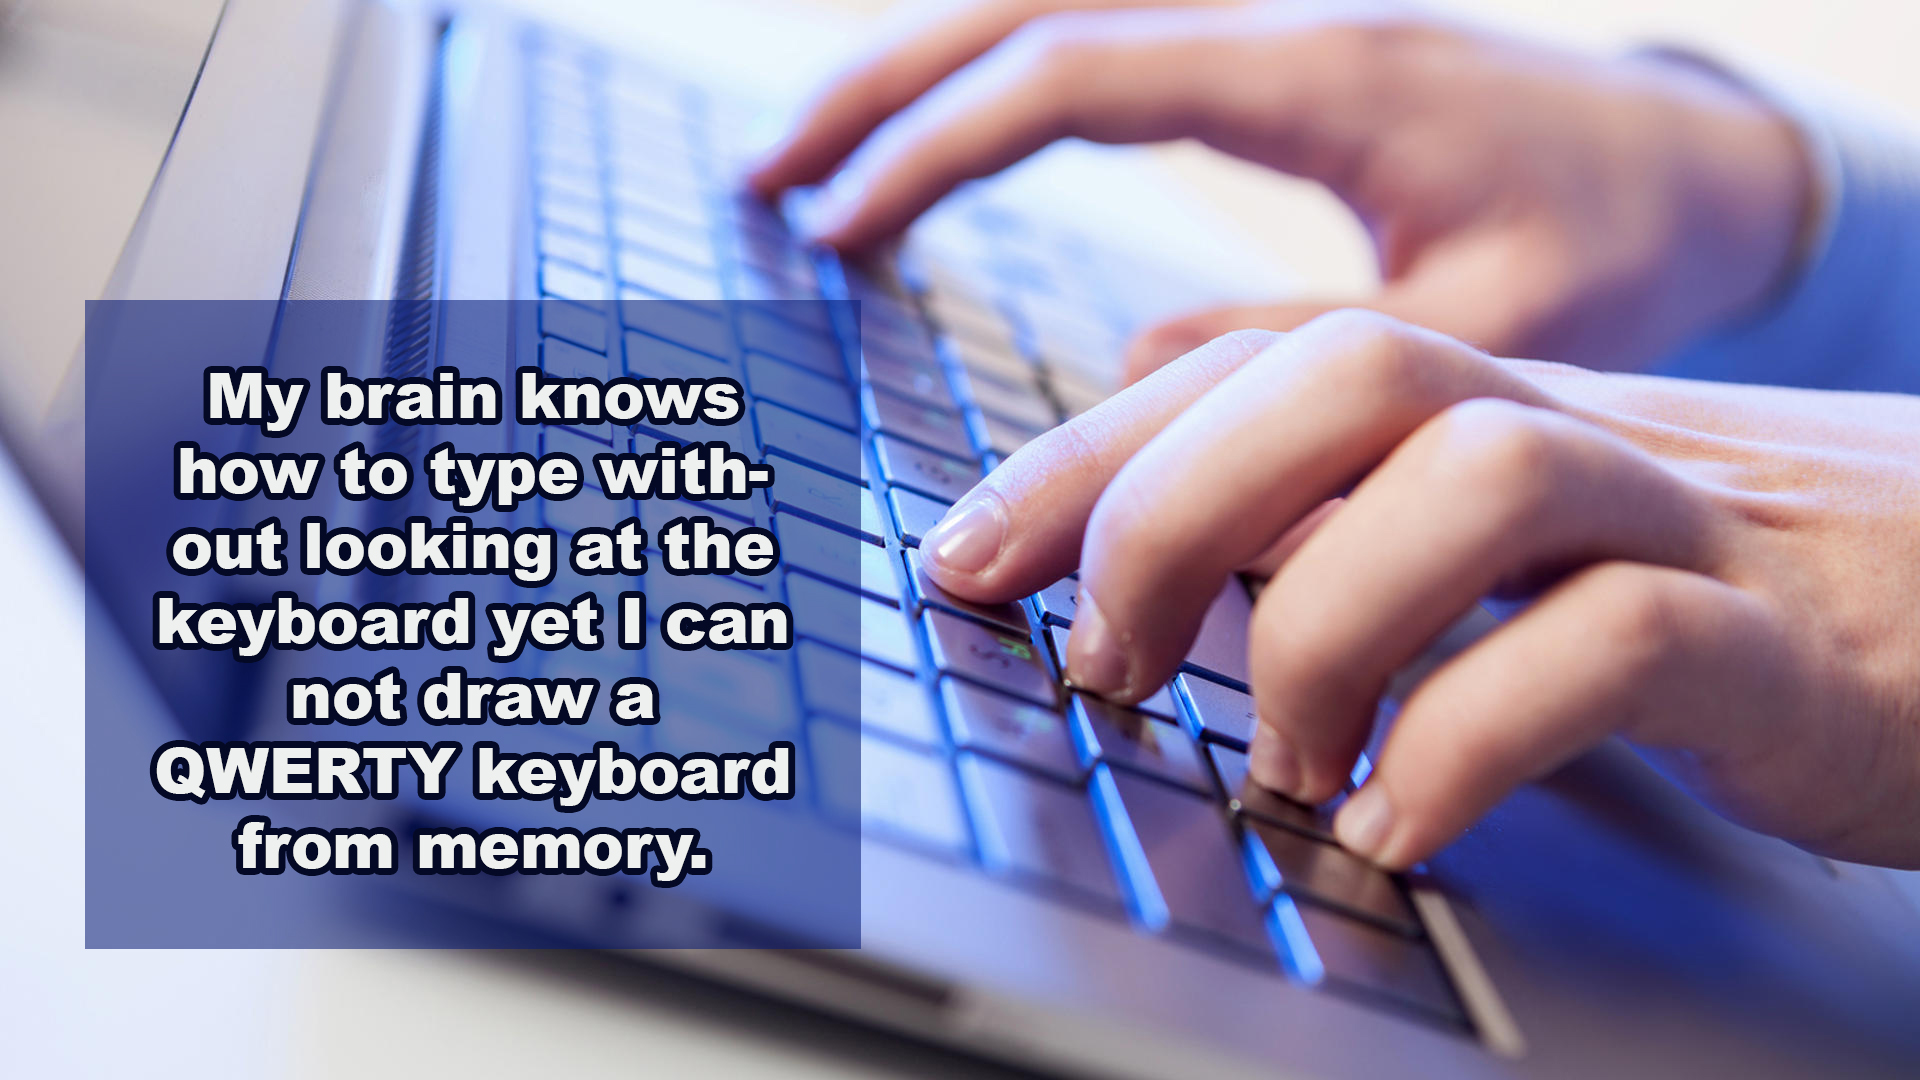 shower thoughts - My brain knows how to type with out looking at the keyboard yet I can not draw a Qwerty keyboard from memory.